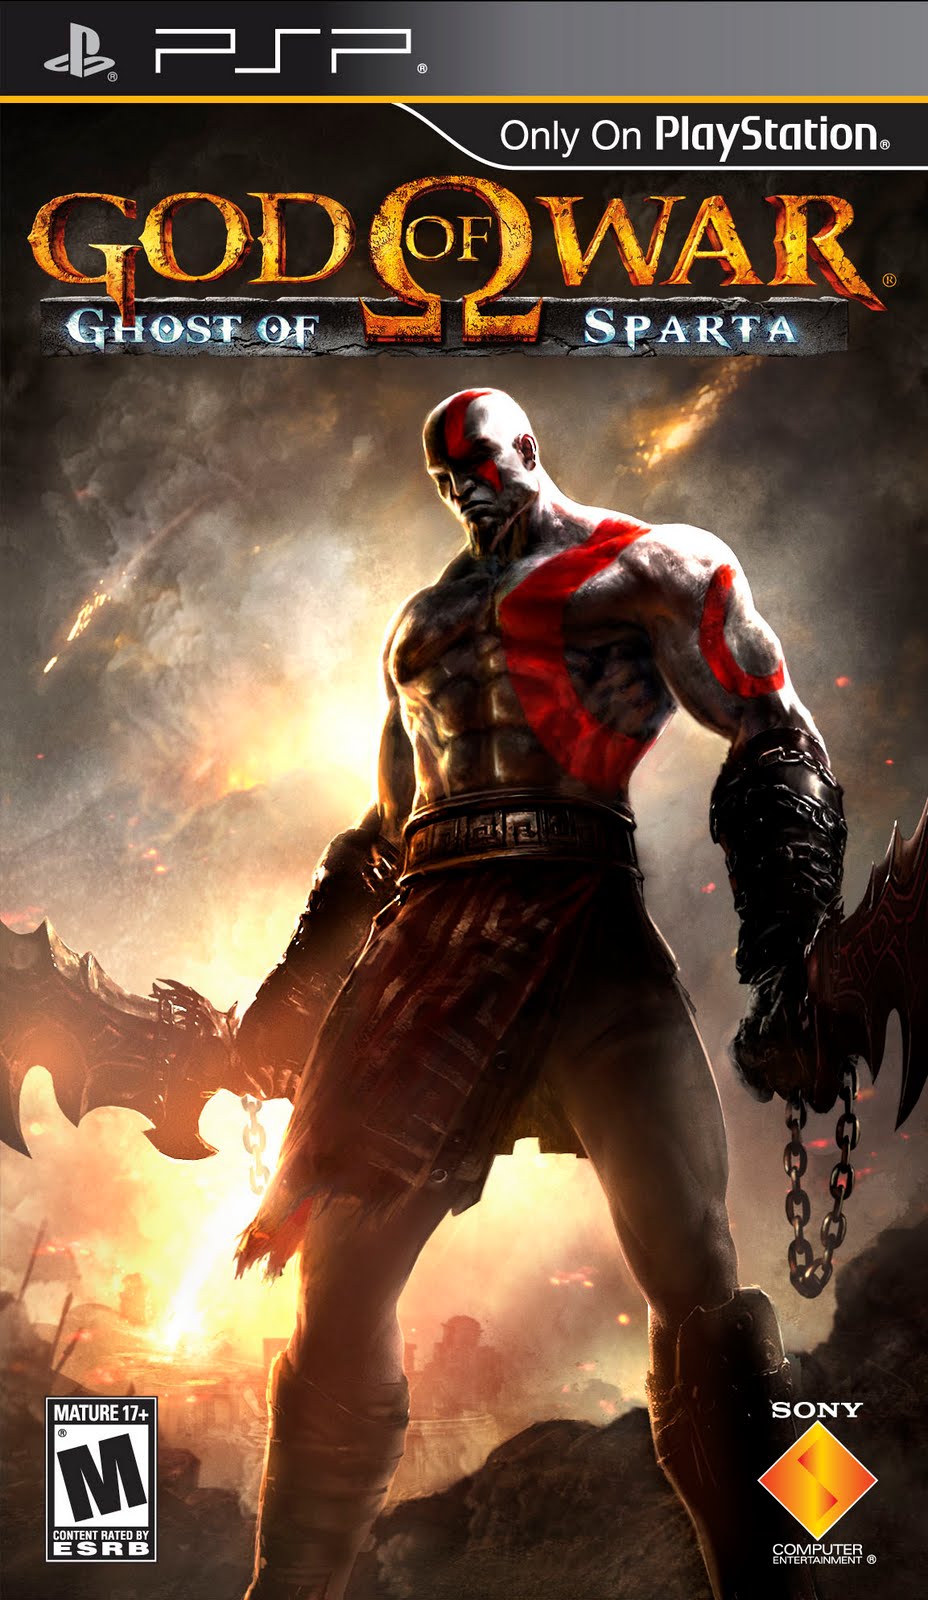 God War: Ghost of Sparta Mod v1.0.2 Apk + Data OBB - Free Download Mod  Game, Apps Pro for Android Latest Version